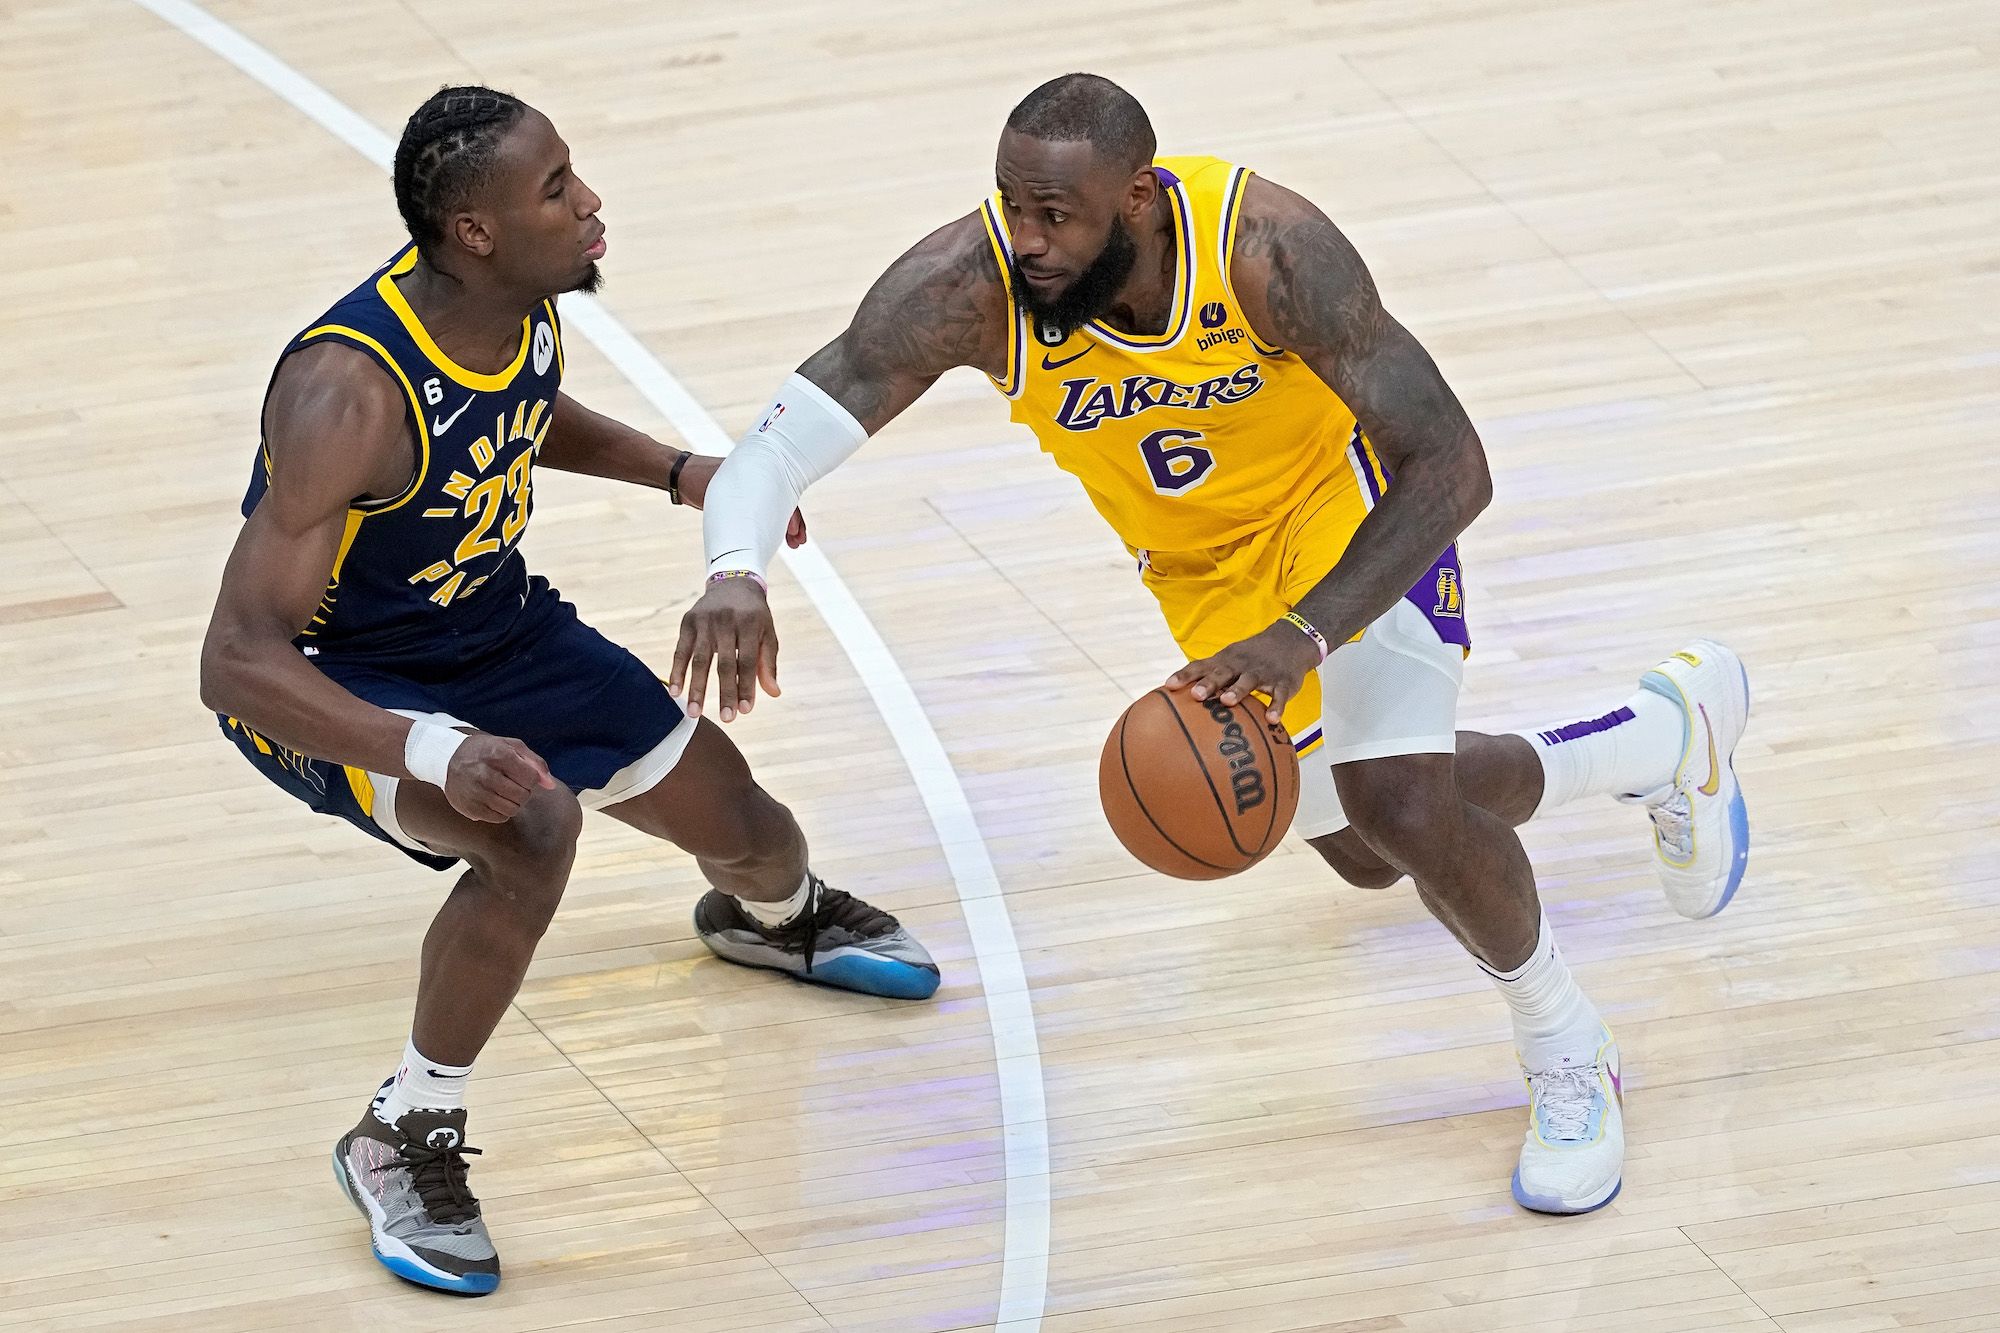 LeBron James edges closer to scoring record with 26 points in Los Angeles  Lakers' win over Indiana Pacers